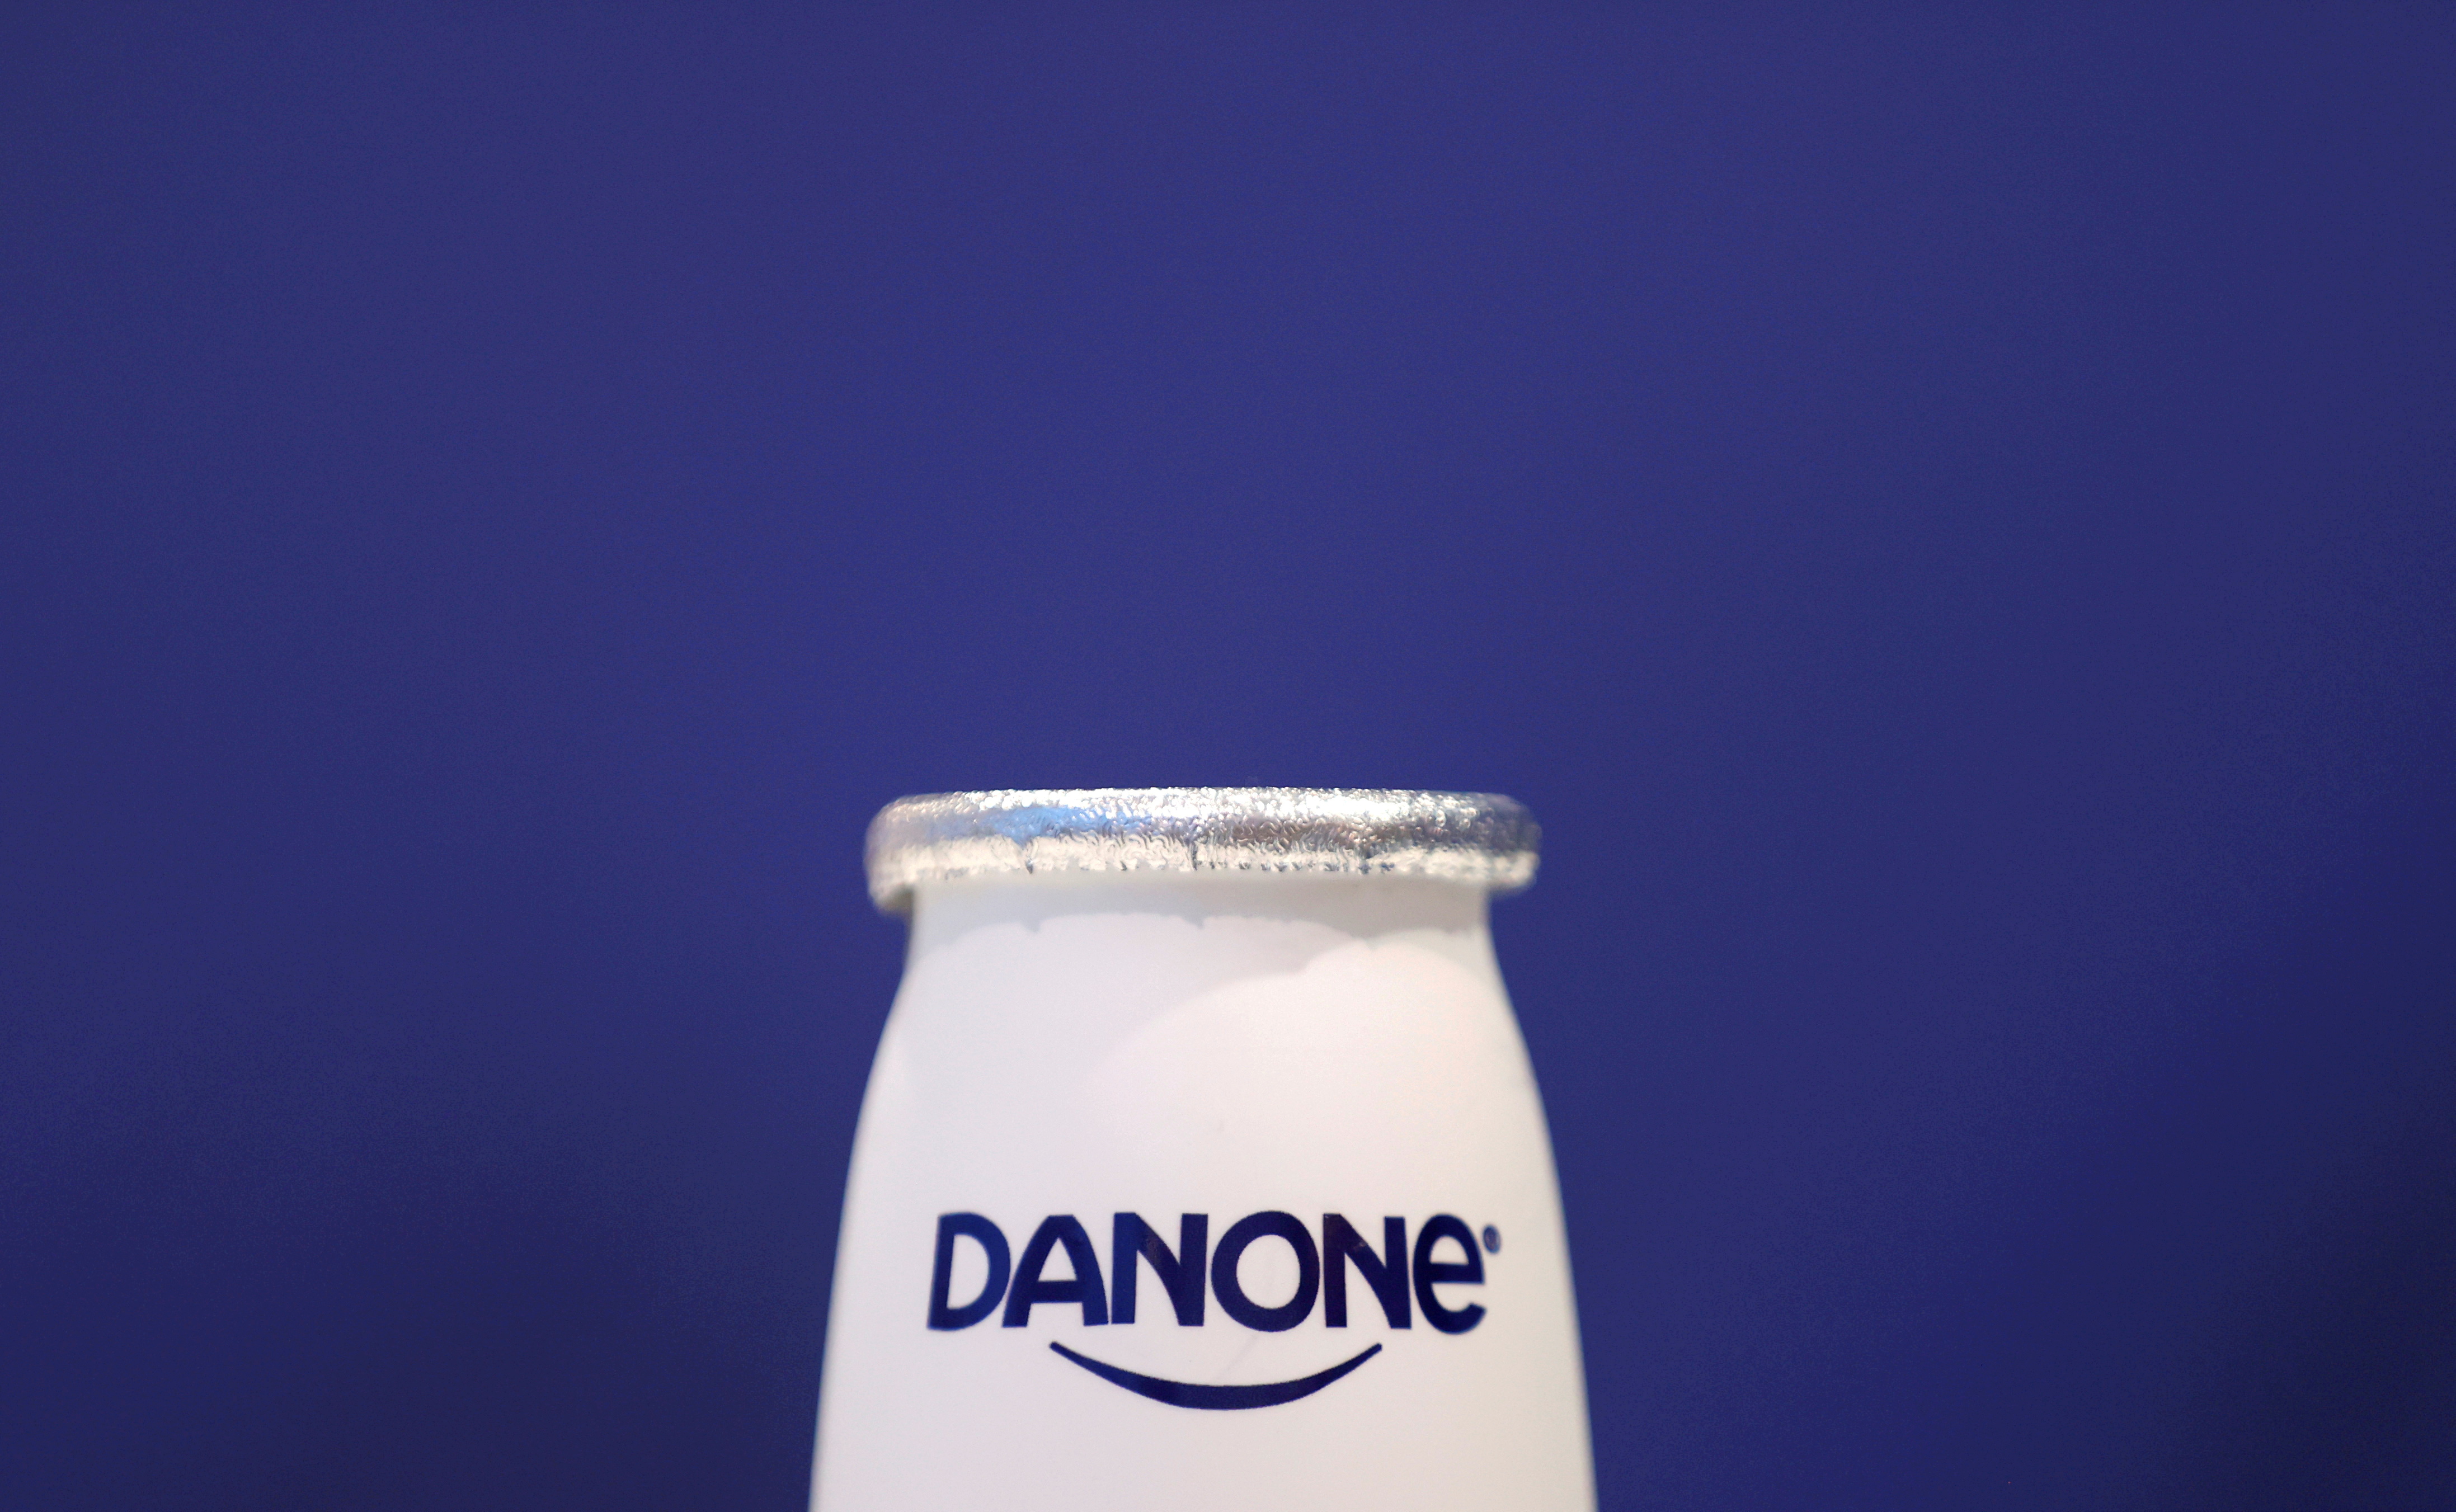 A company logo is seen on a product displayed before French food group Danone's 2019 annual results presentation in Paris